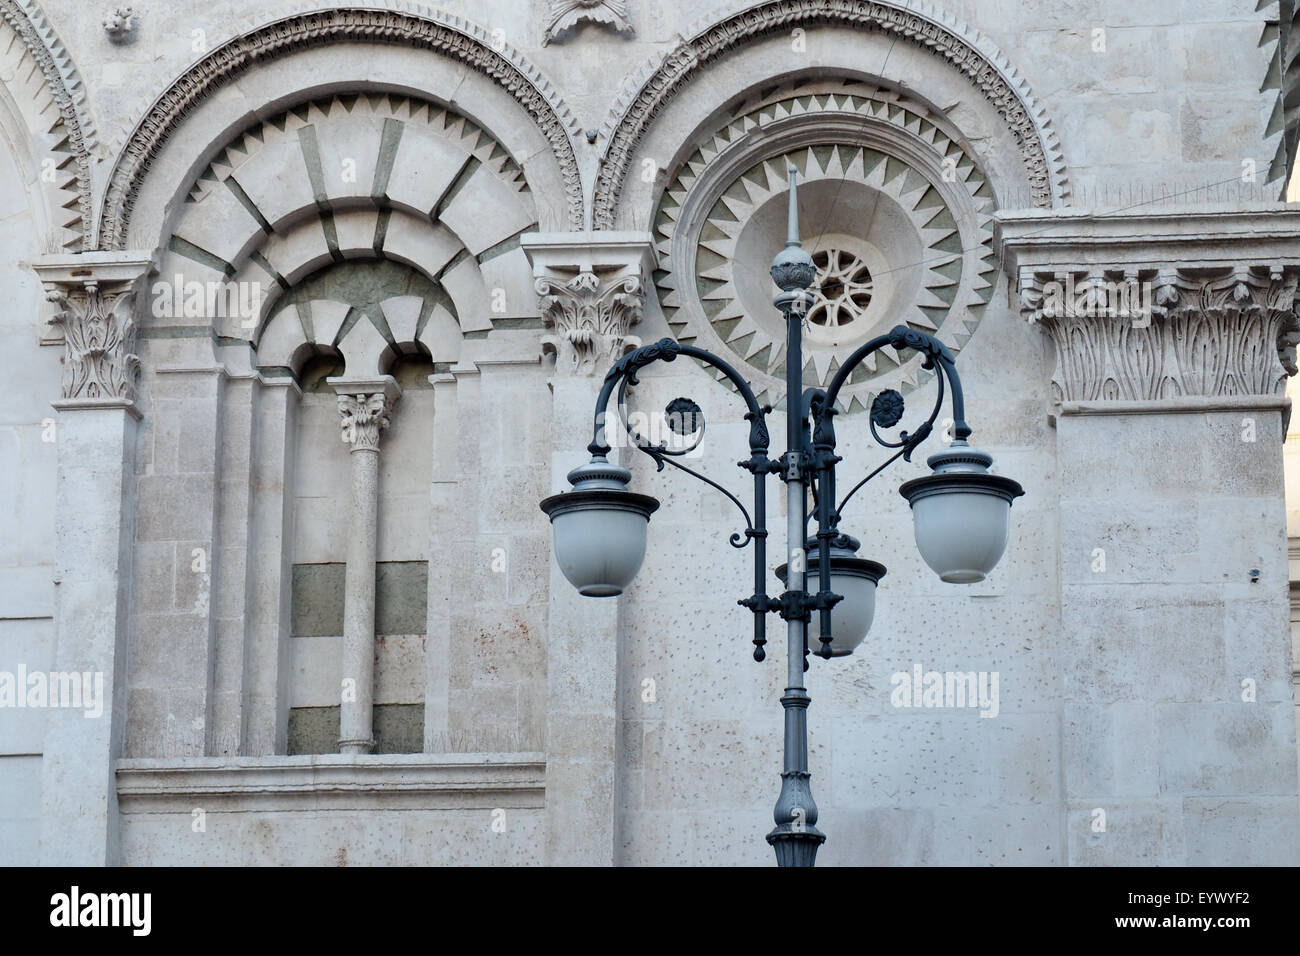 Ornate street lighting and Romanesque facade of Church of Our Lady of the Assumption, Foggia. Stock Photo